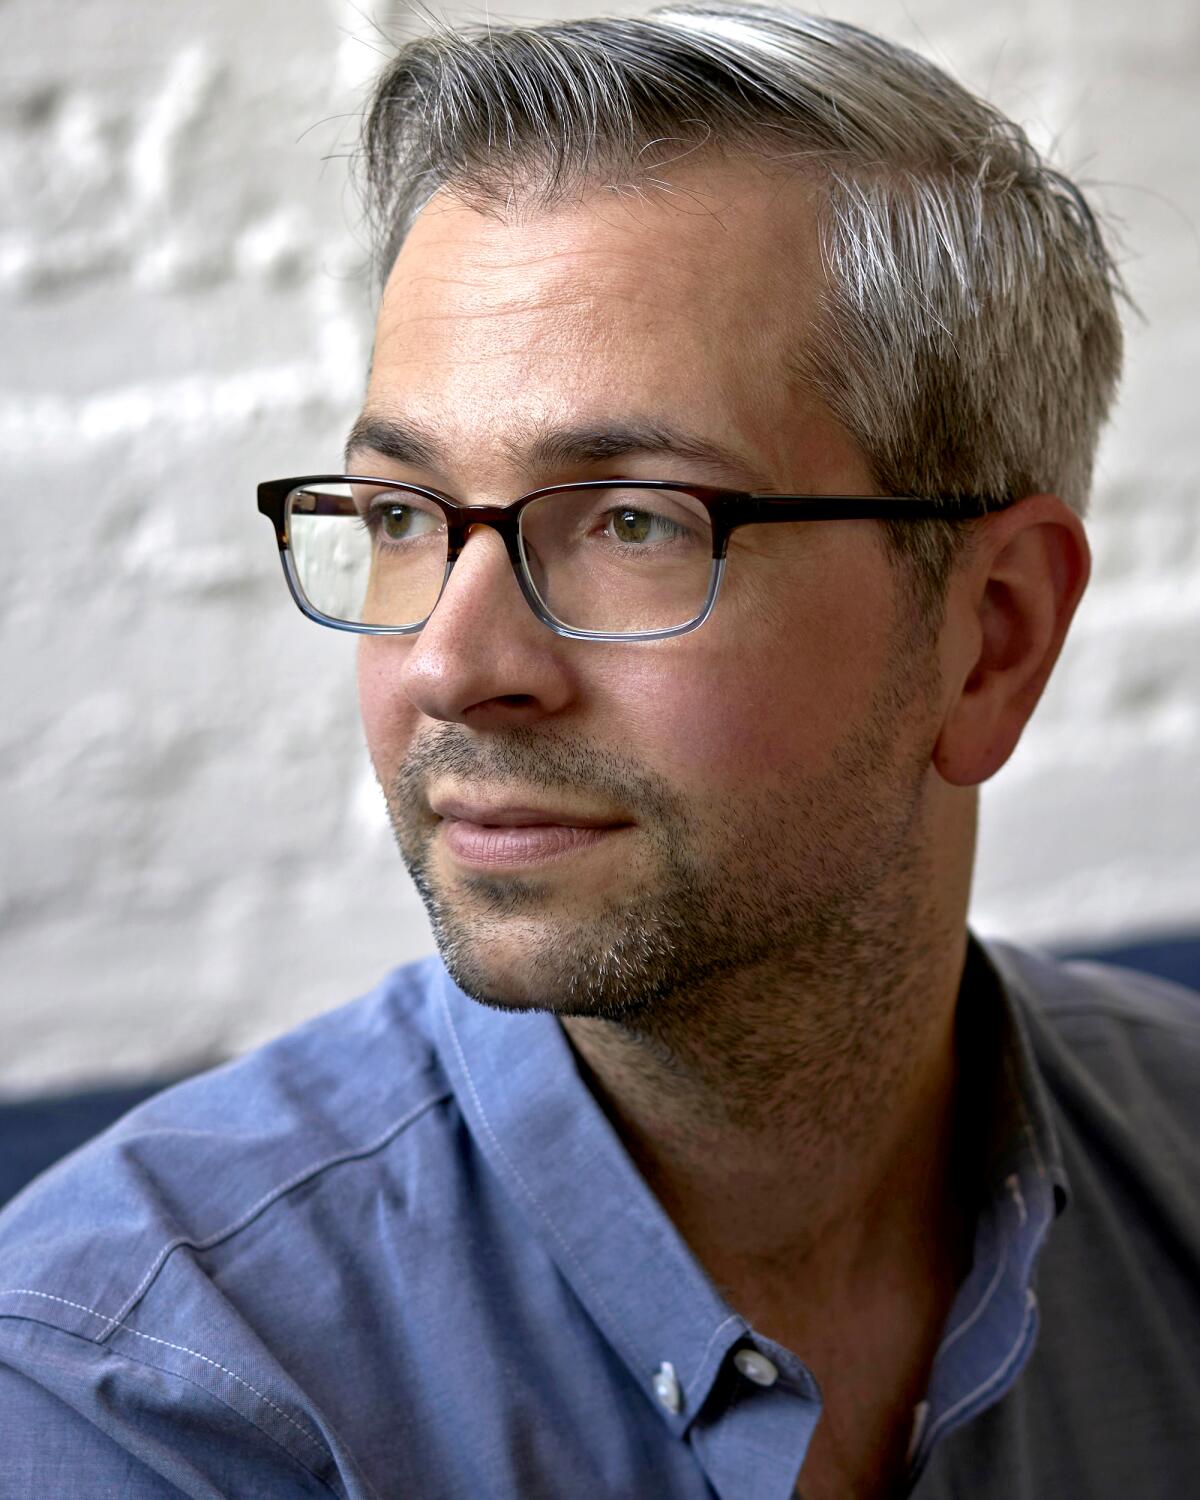 A portrait of a writer with close-cropped salt-and-pepper hair, wearing plastic-rimmed glasses.